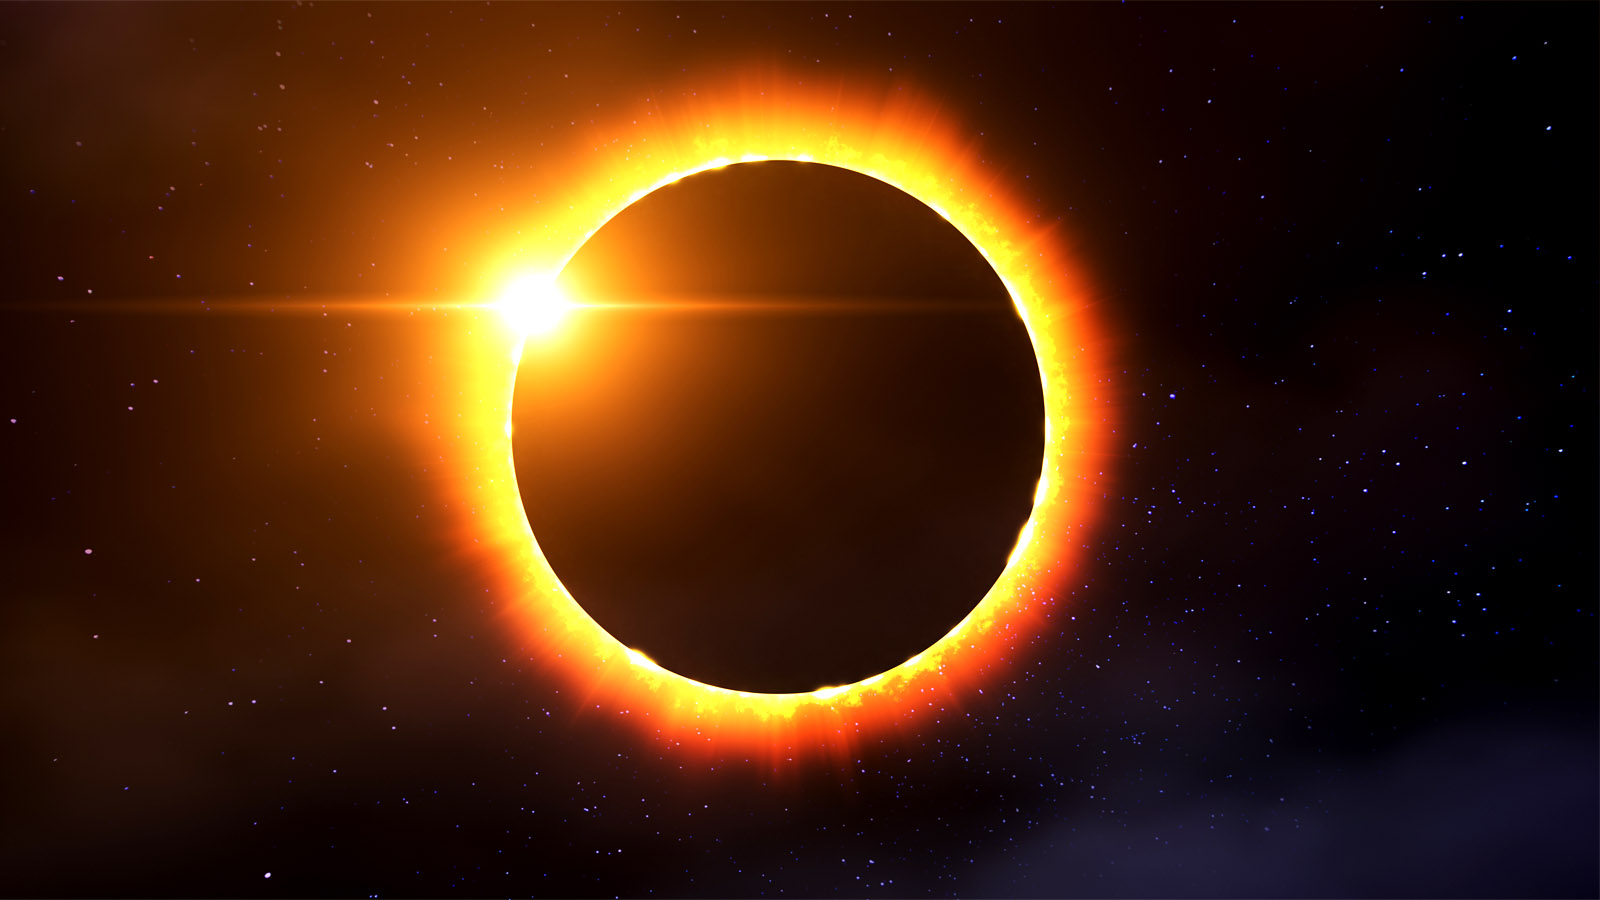 Scientists Warn April 8th Eclipse Could Lead To Fatal Accidents